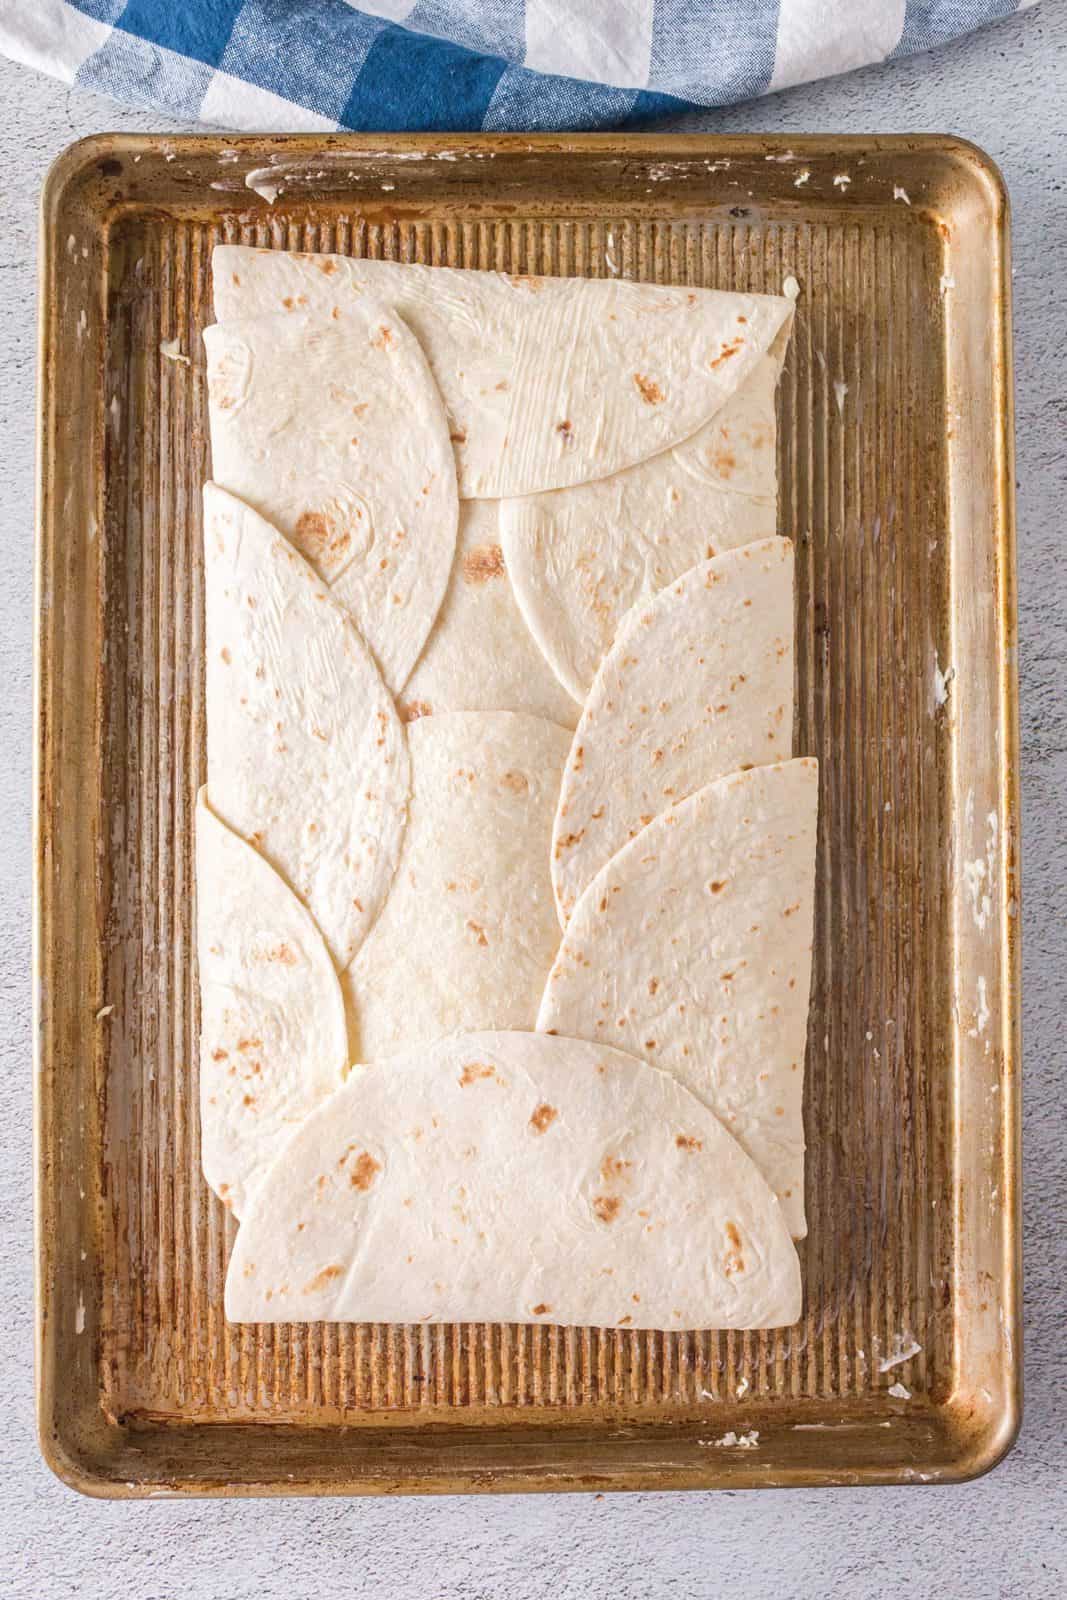 Tortillas folded over the top to encase the filling.